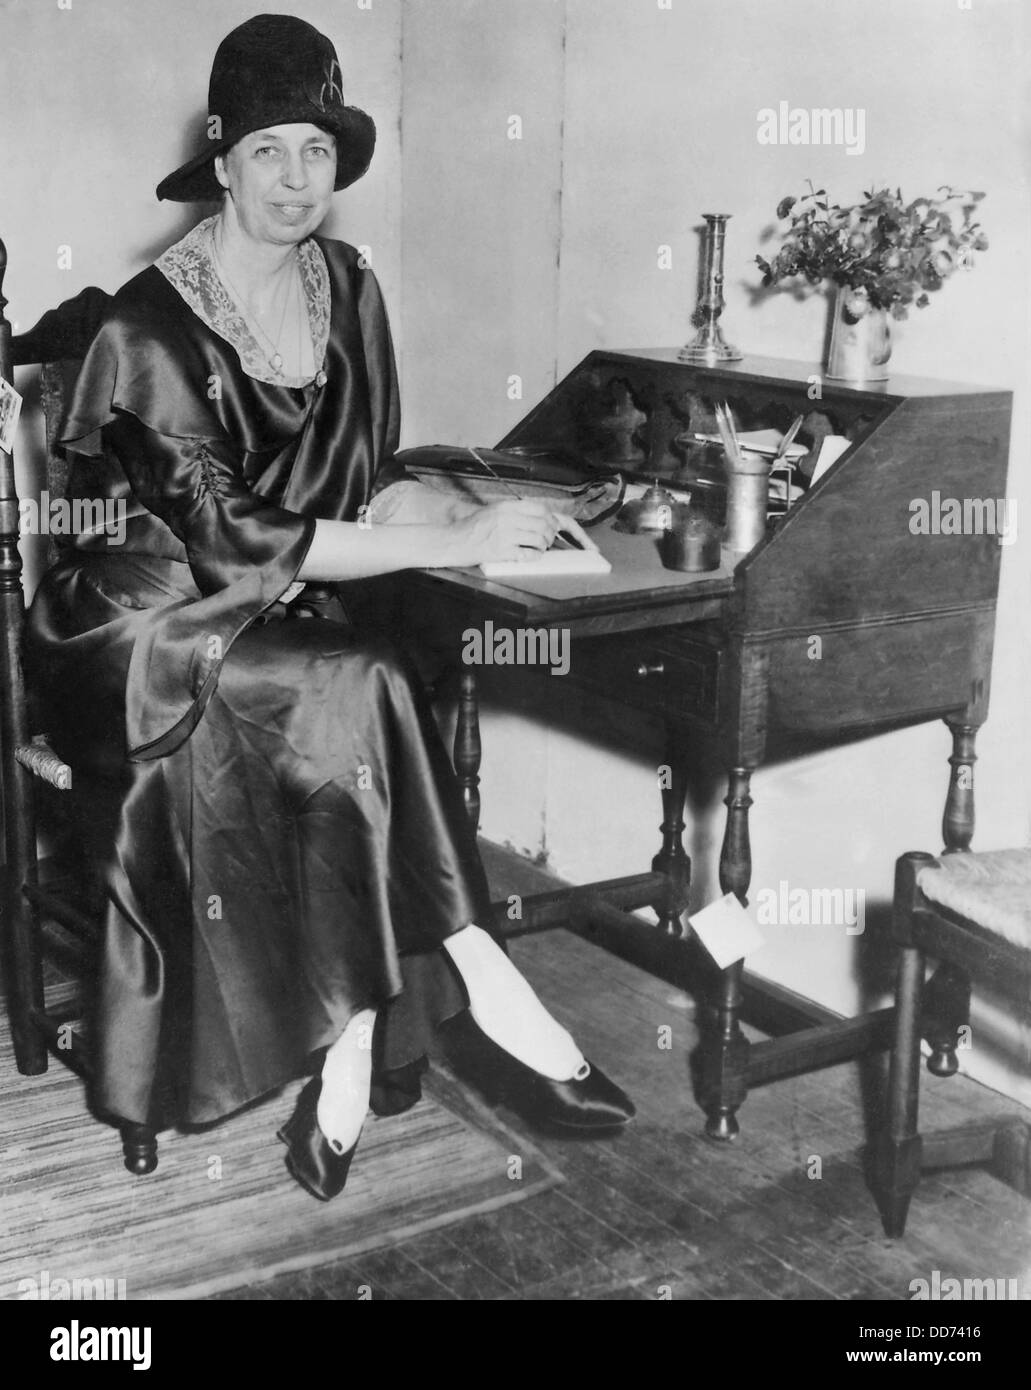 Eleanor Roosevelt in New York City. 1932. She is writing at a desk, dressed in a silk dress with lace collar, cloche hat, and Stock Photo